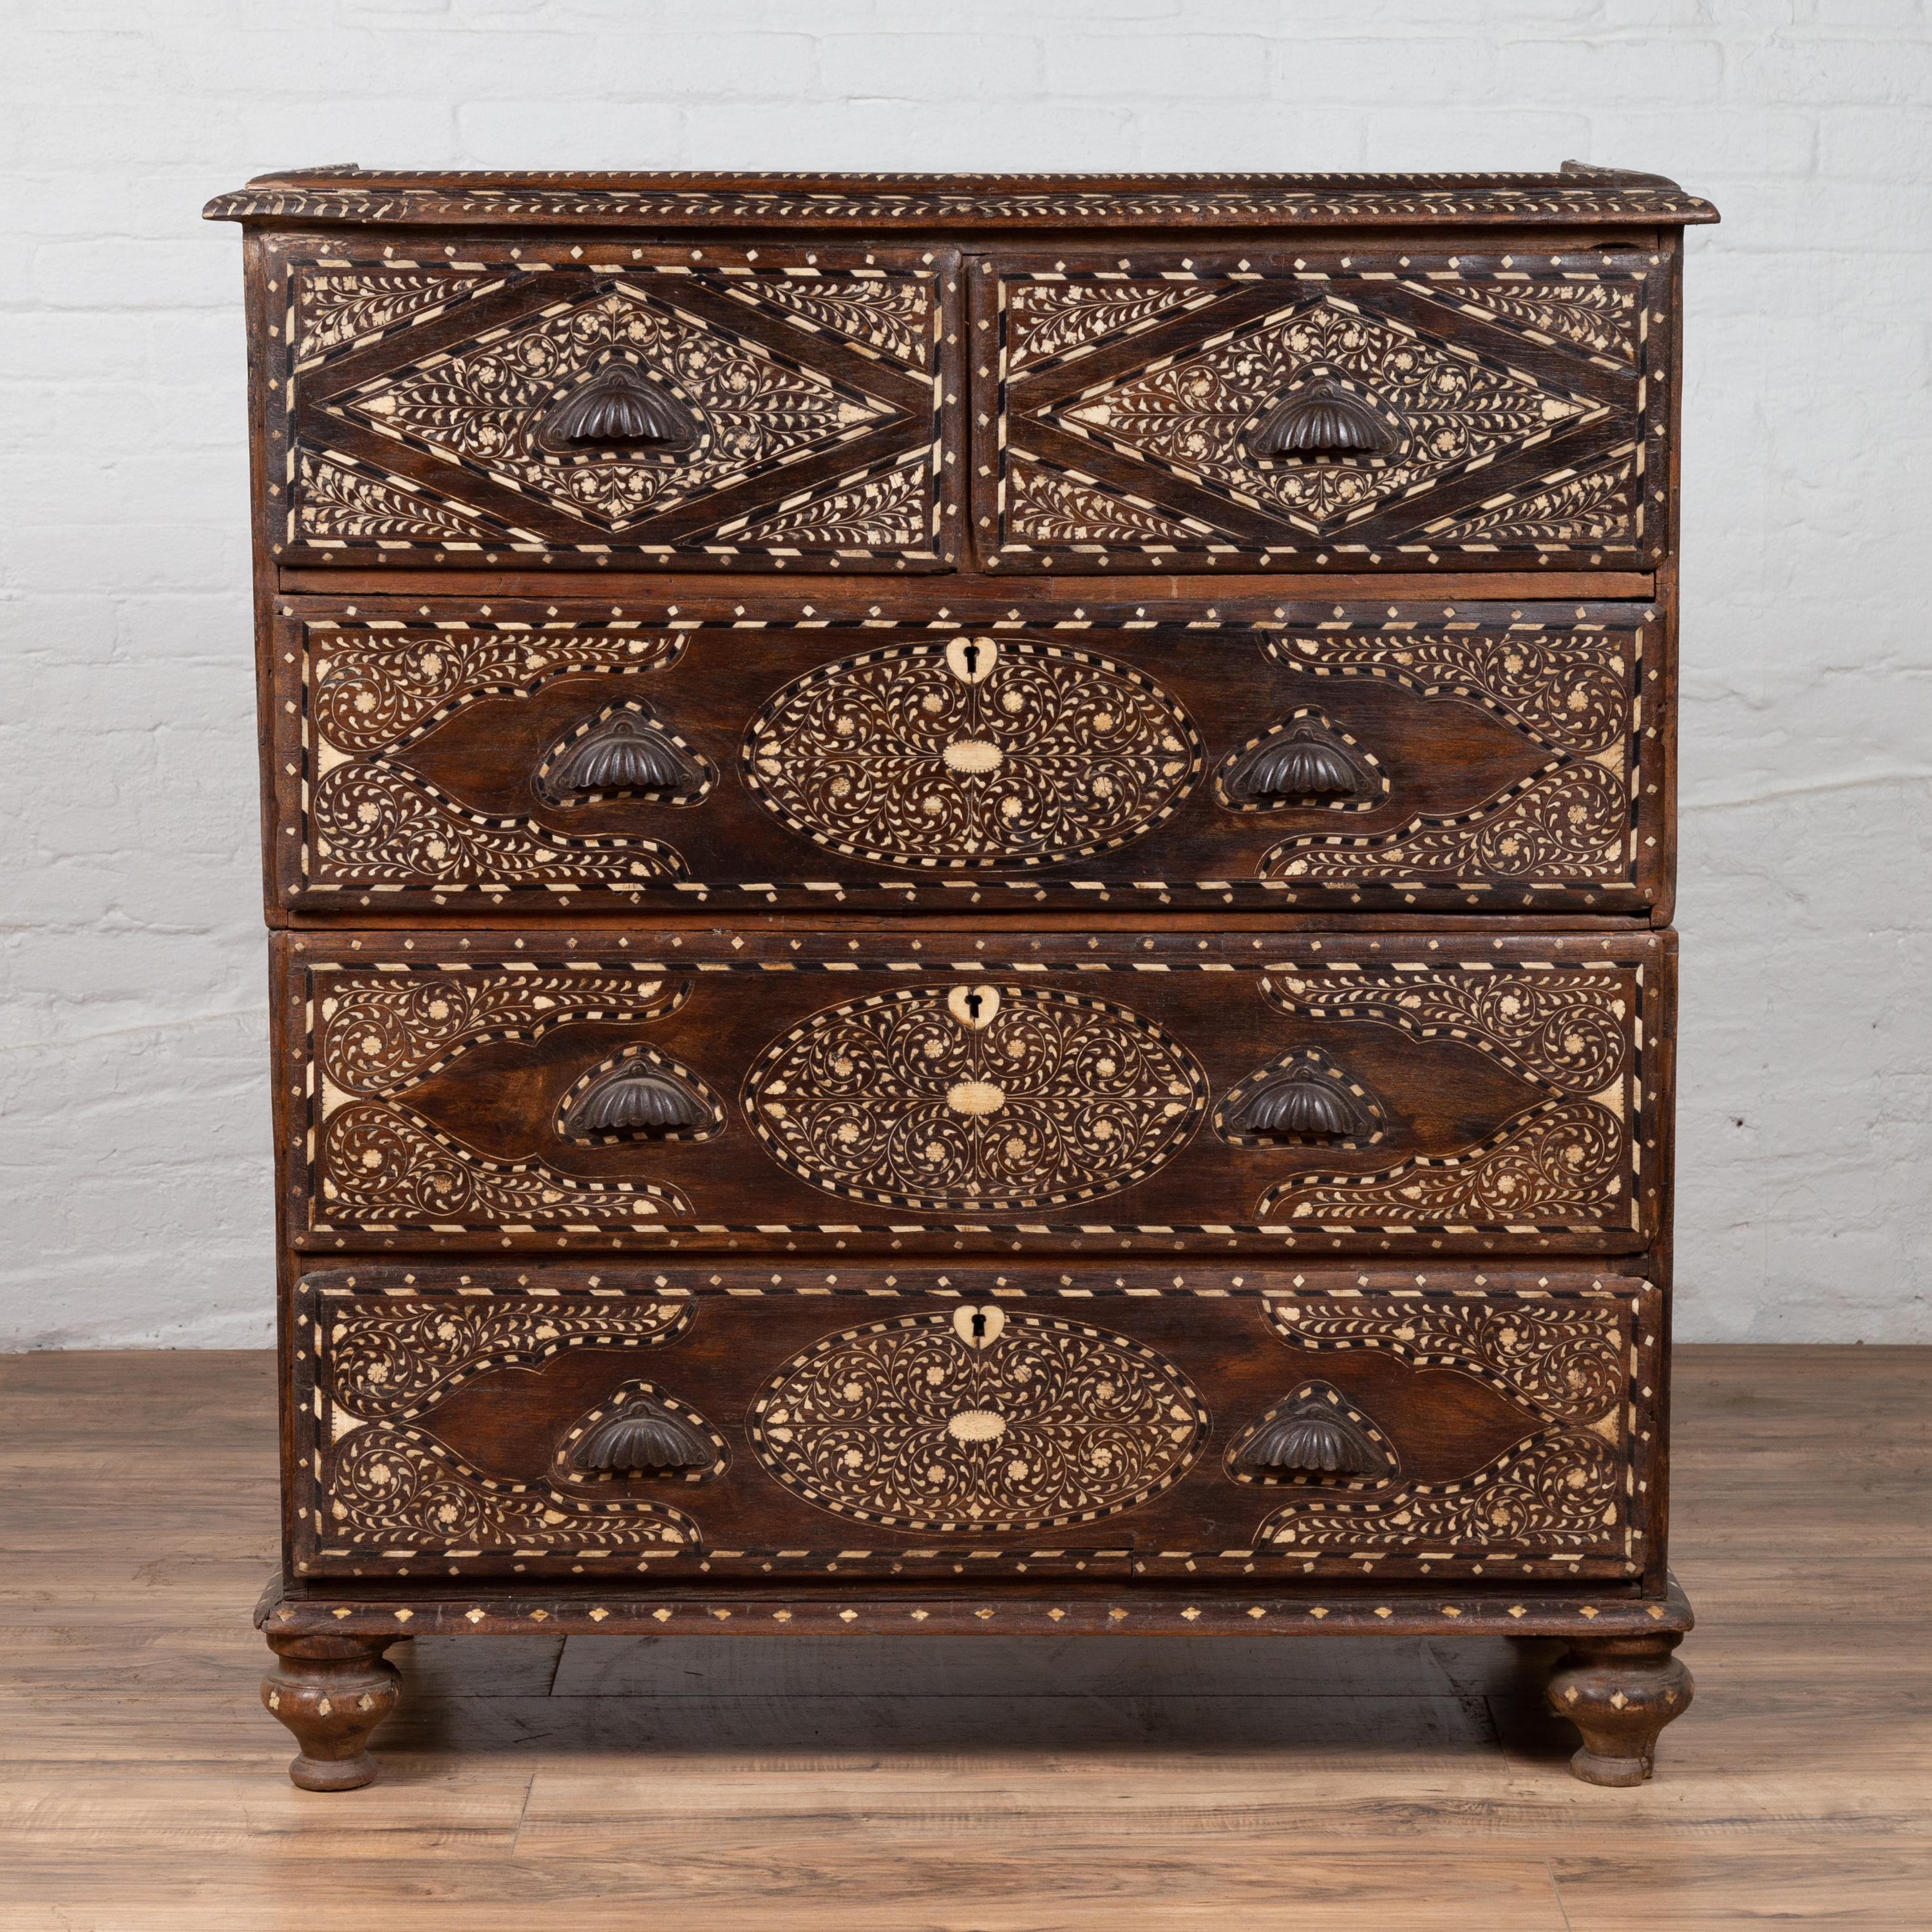 An antique Anglo-Indian two-part dresser from the early 20th century with bone inlay, scrollwork, foliage and geometrical motifs. Born in India during the early years of the 20th century, this stunning two-part dresser features a molded cornice